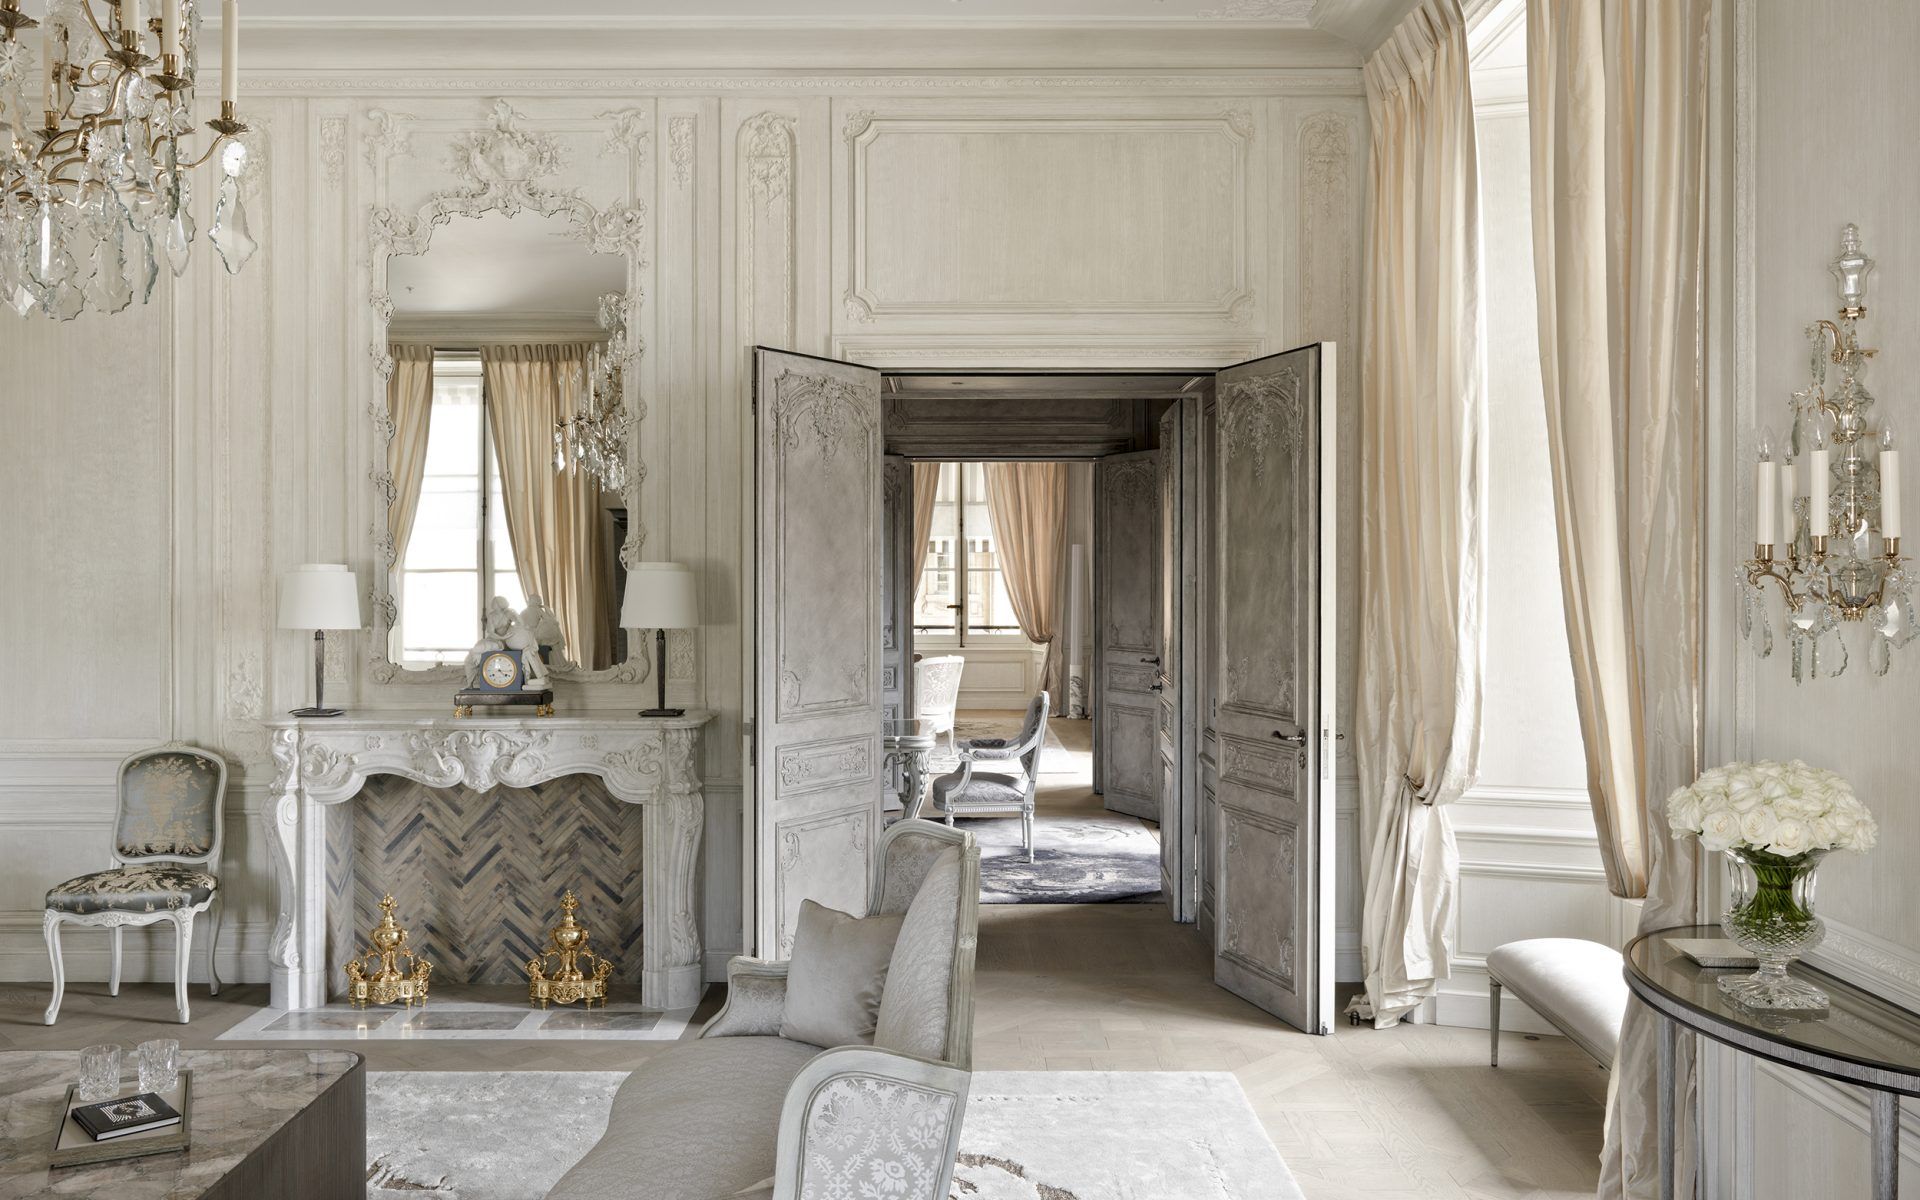 7 of the Most Luxurious Hotel Suites in Paris